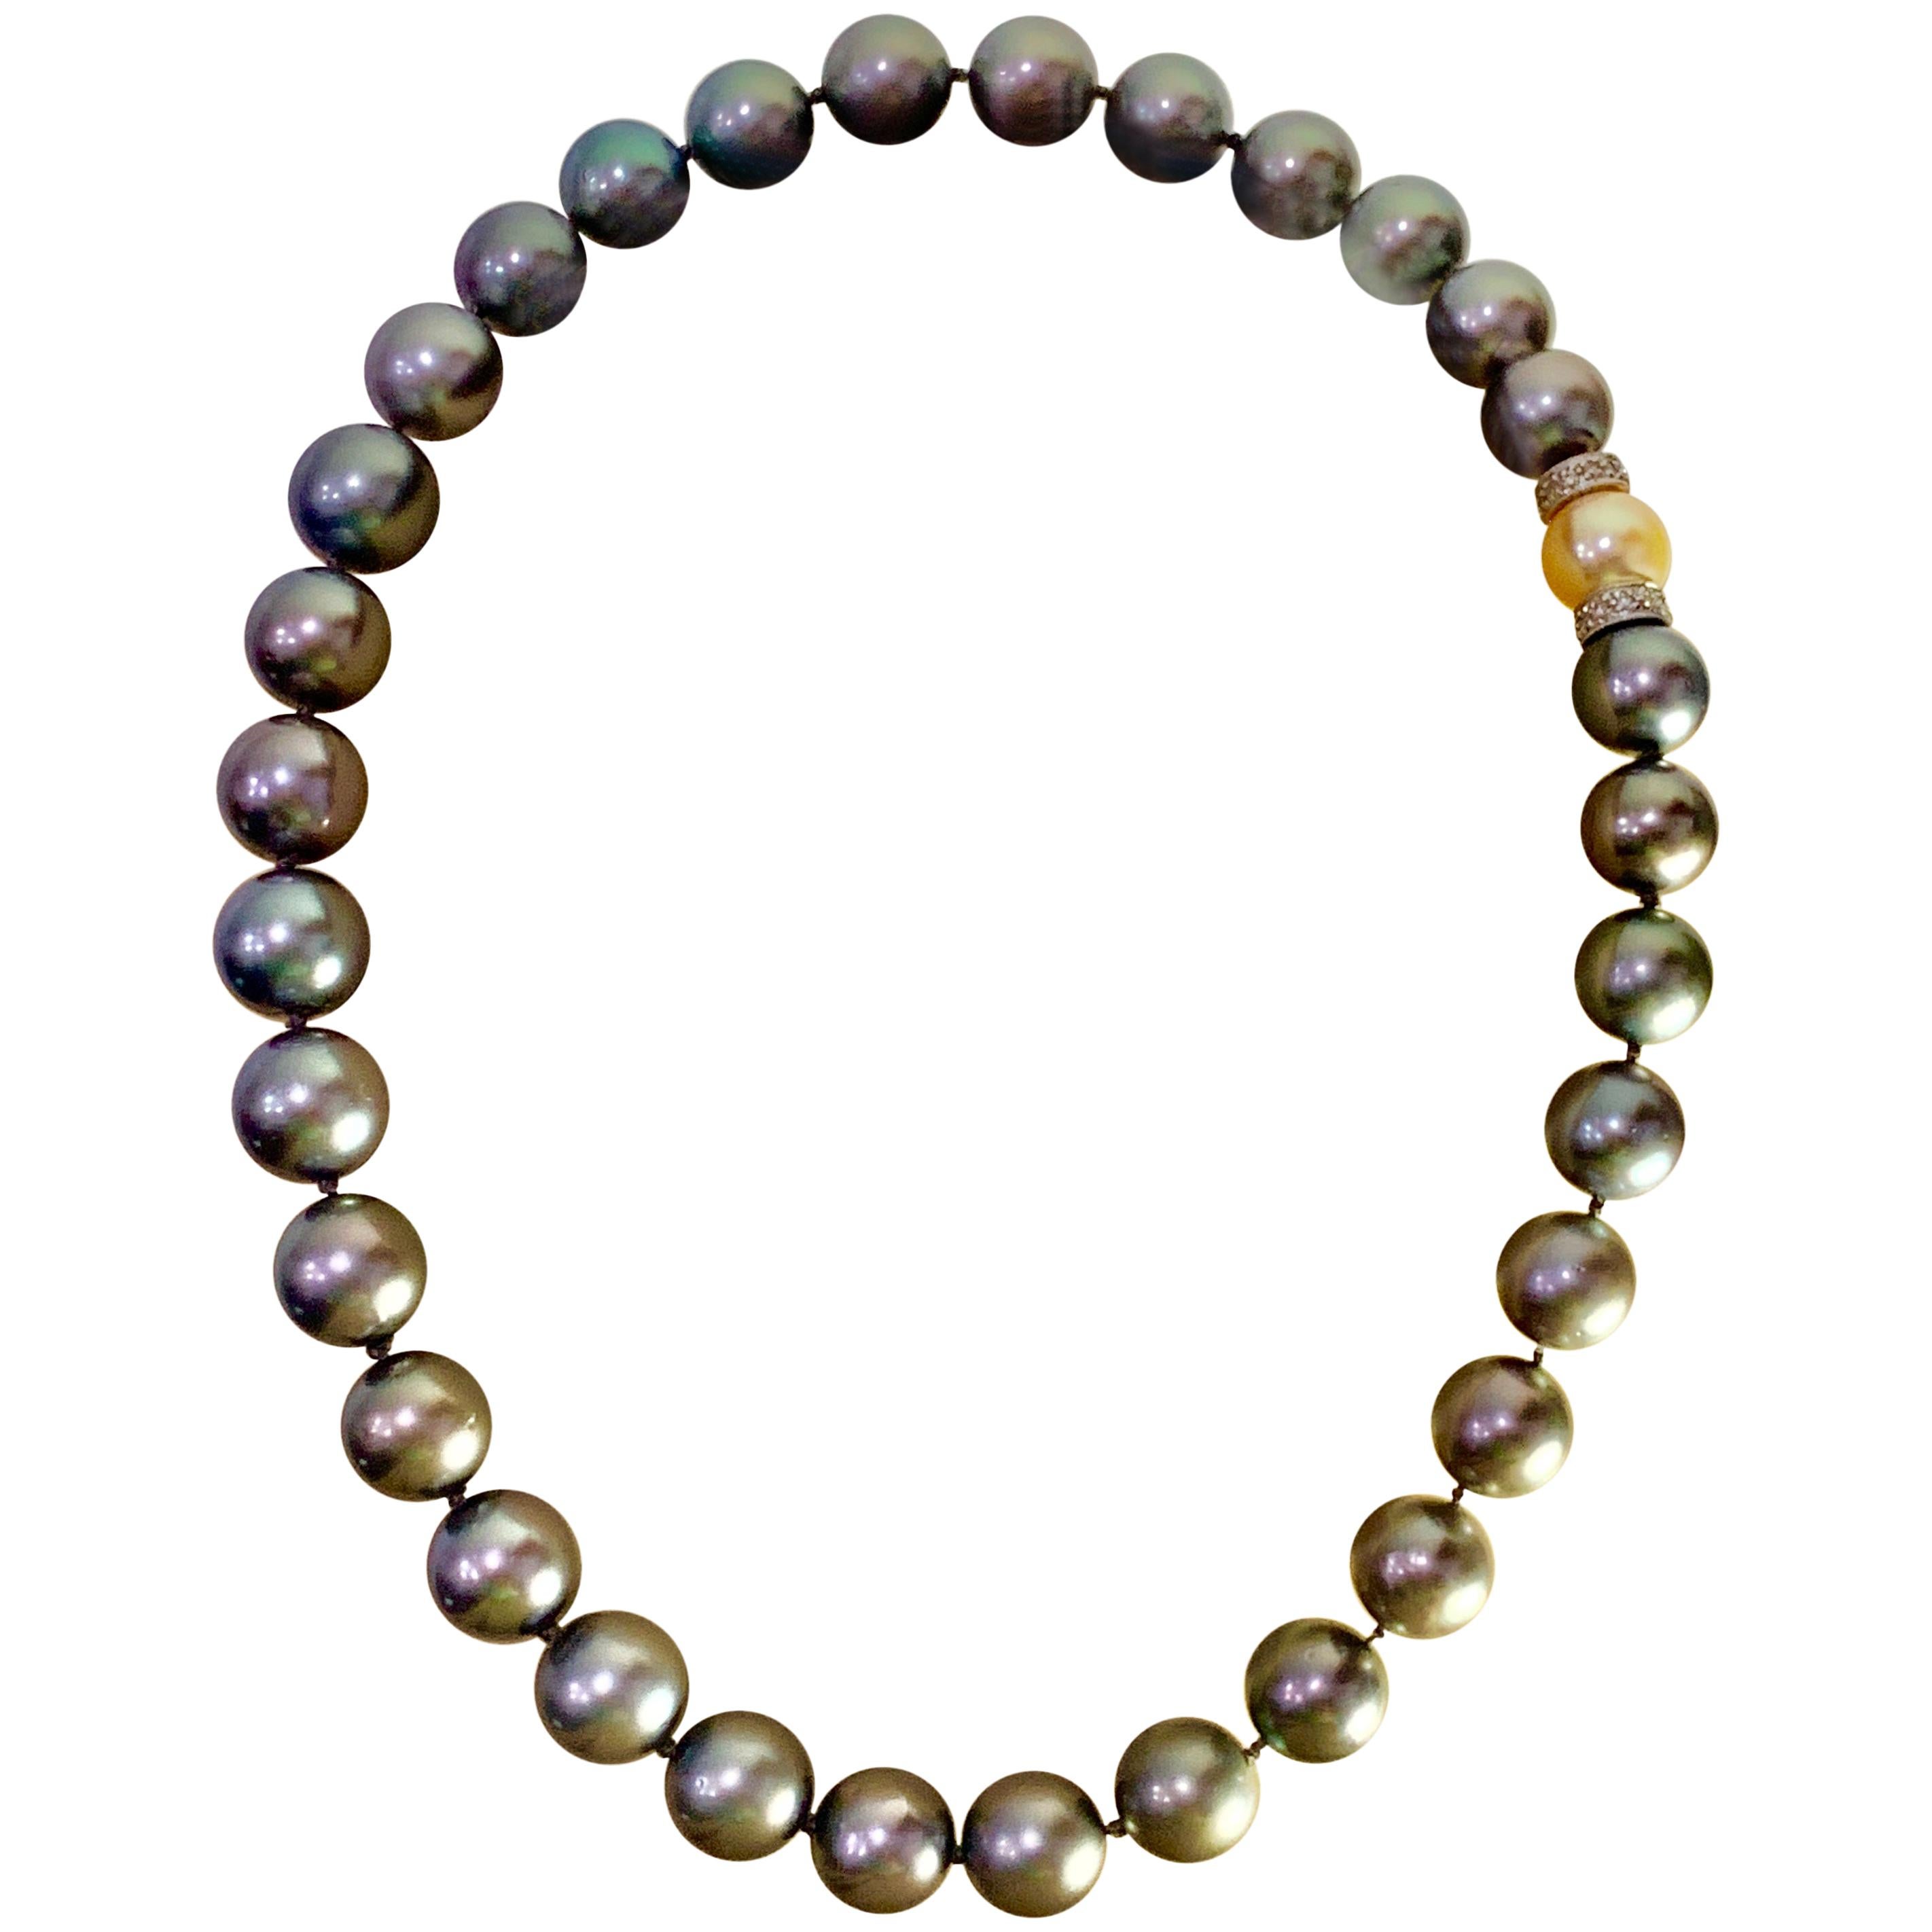 10 MM Tahitian Black Pearls Strand Necklace, Estate, 16 inch